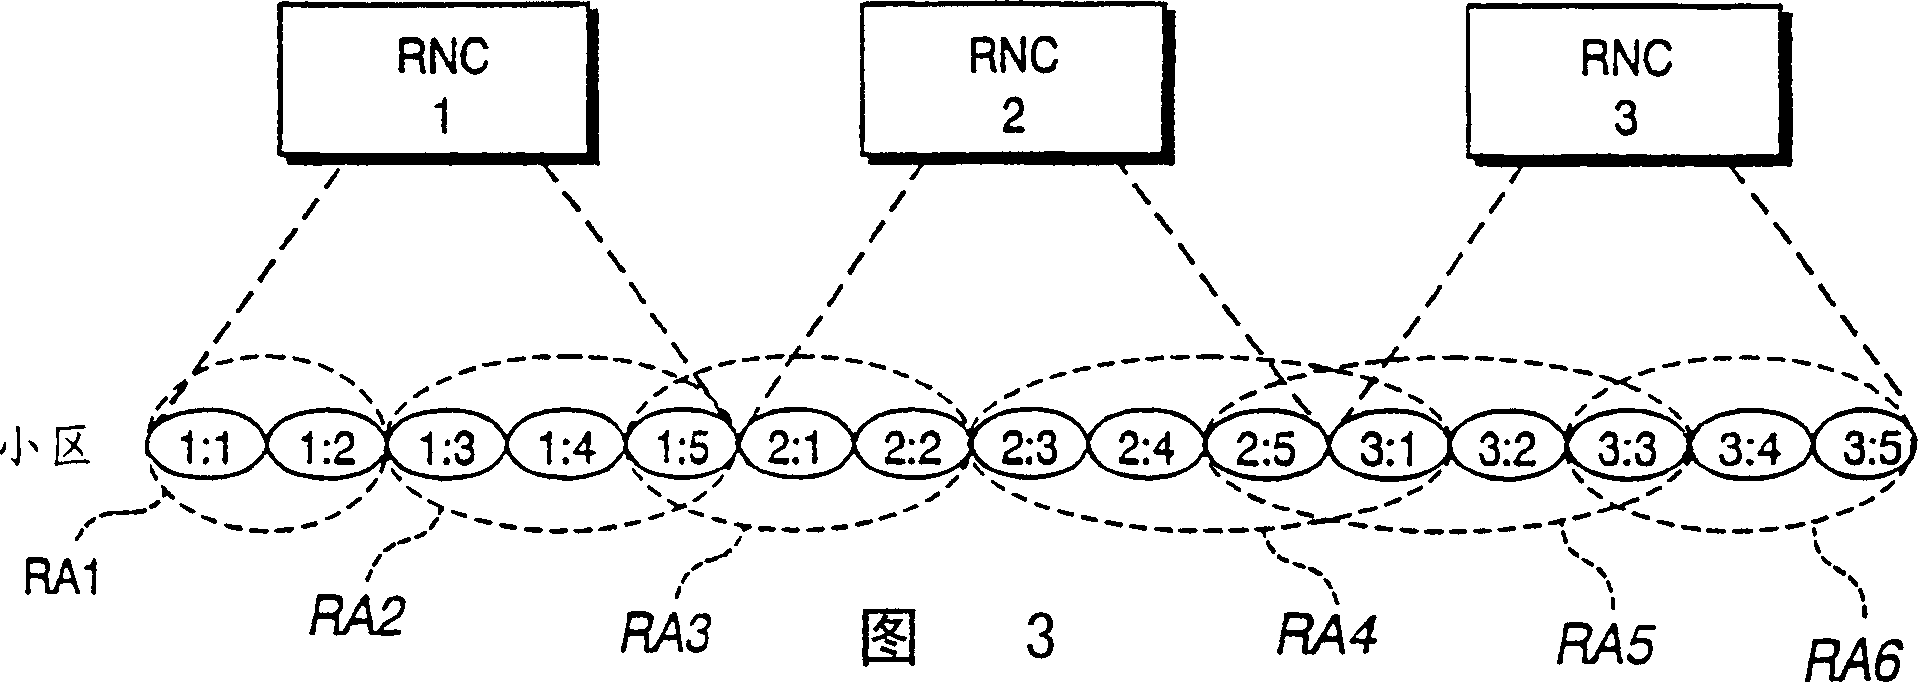 Method and apparatus for paging and responding to paging in a mobile radio communications